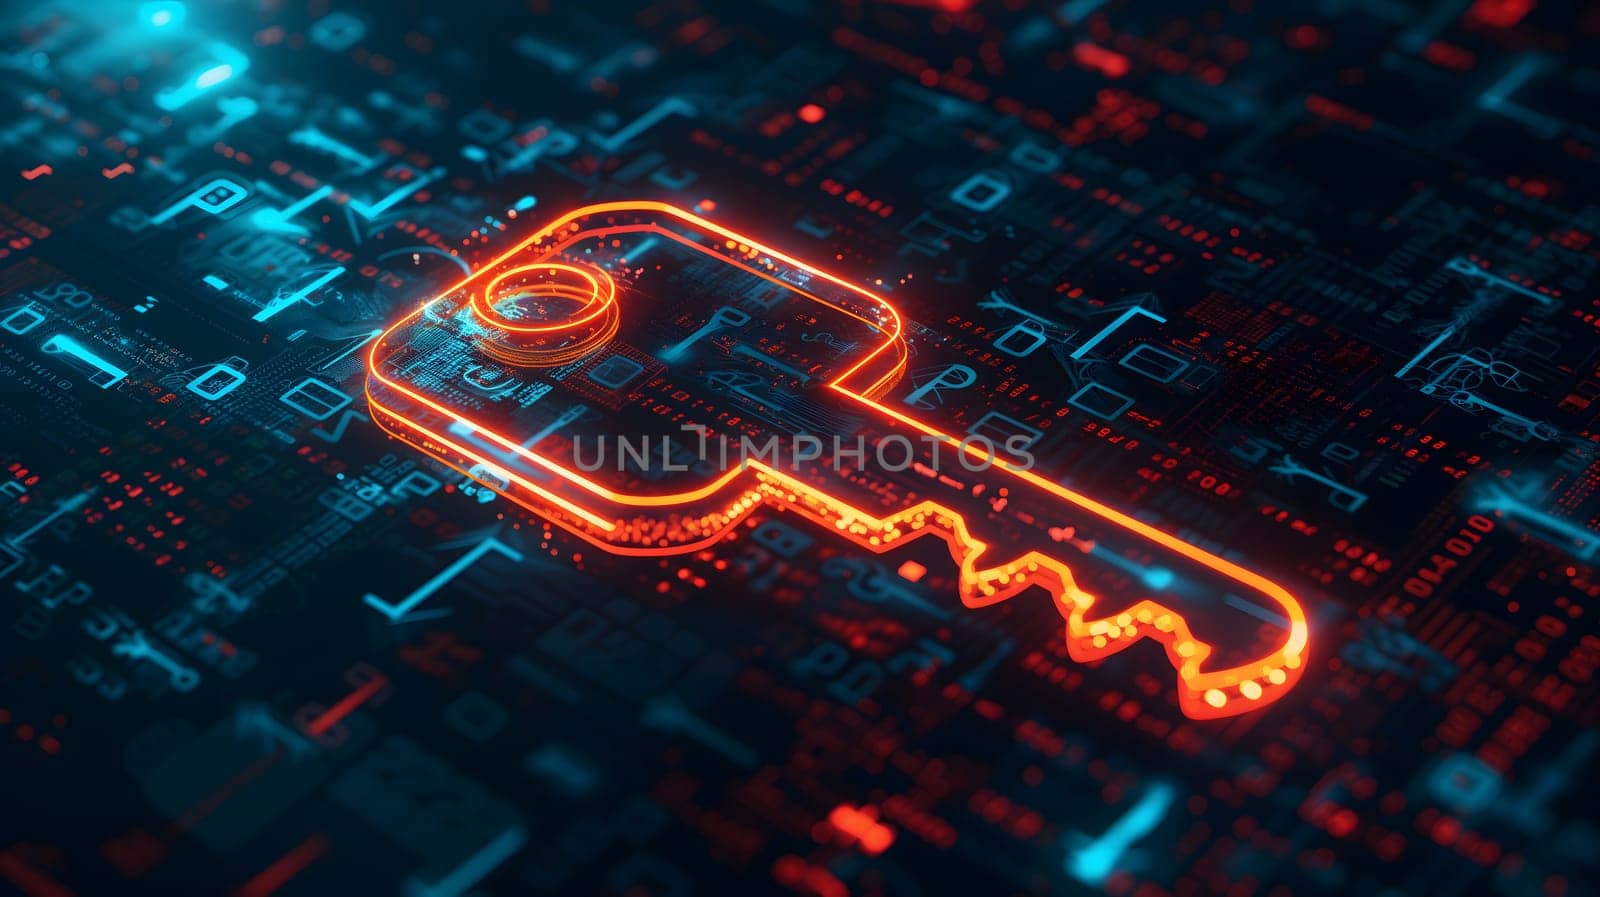 Orange holographic key icon on flat glowing futuristic circuit board background. Neural network generated image. Not based on any actual person or scene.